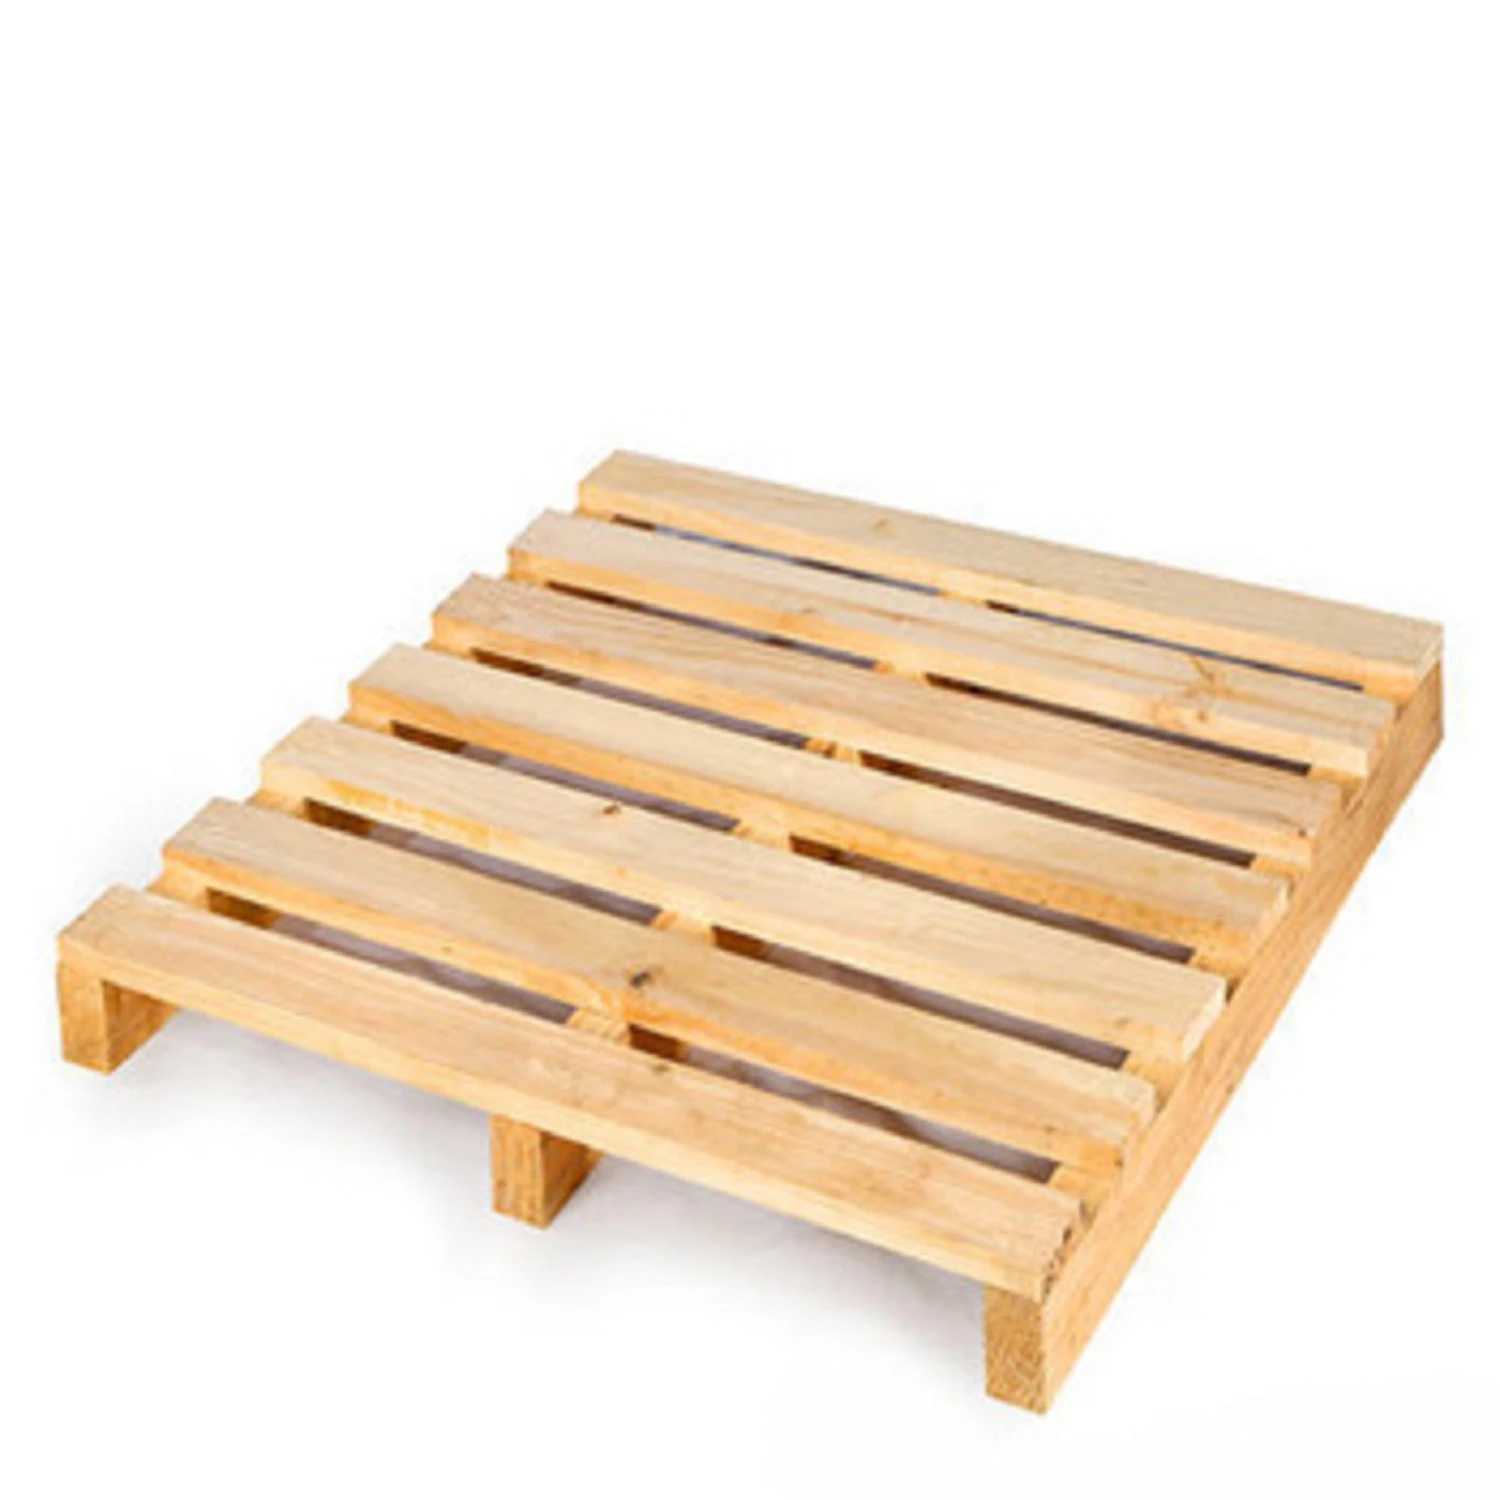 Wood Pallet/ New Wood Crates and Pallet Half Pallet